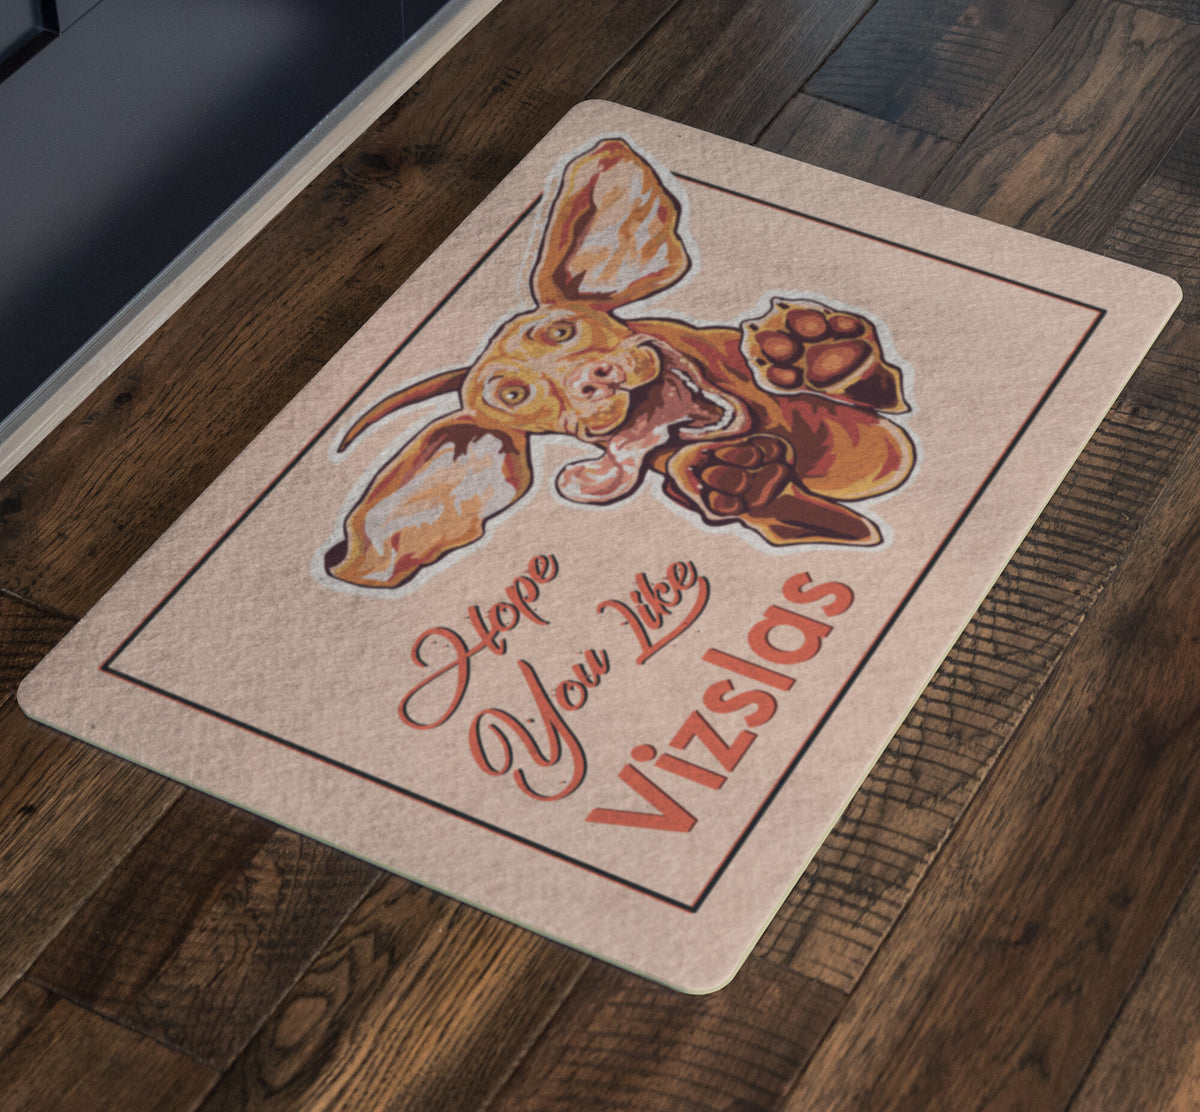 Hare & There Doormat